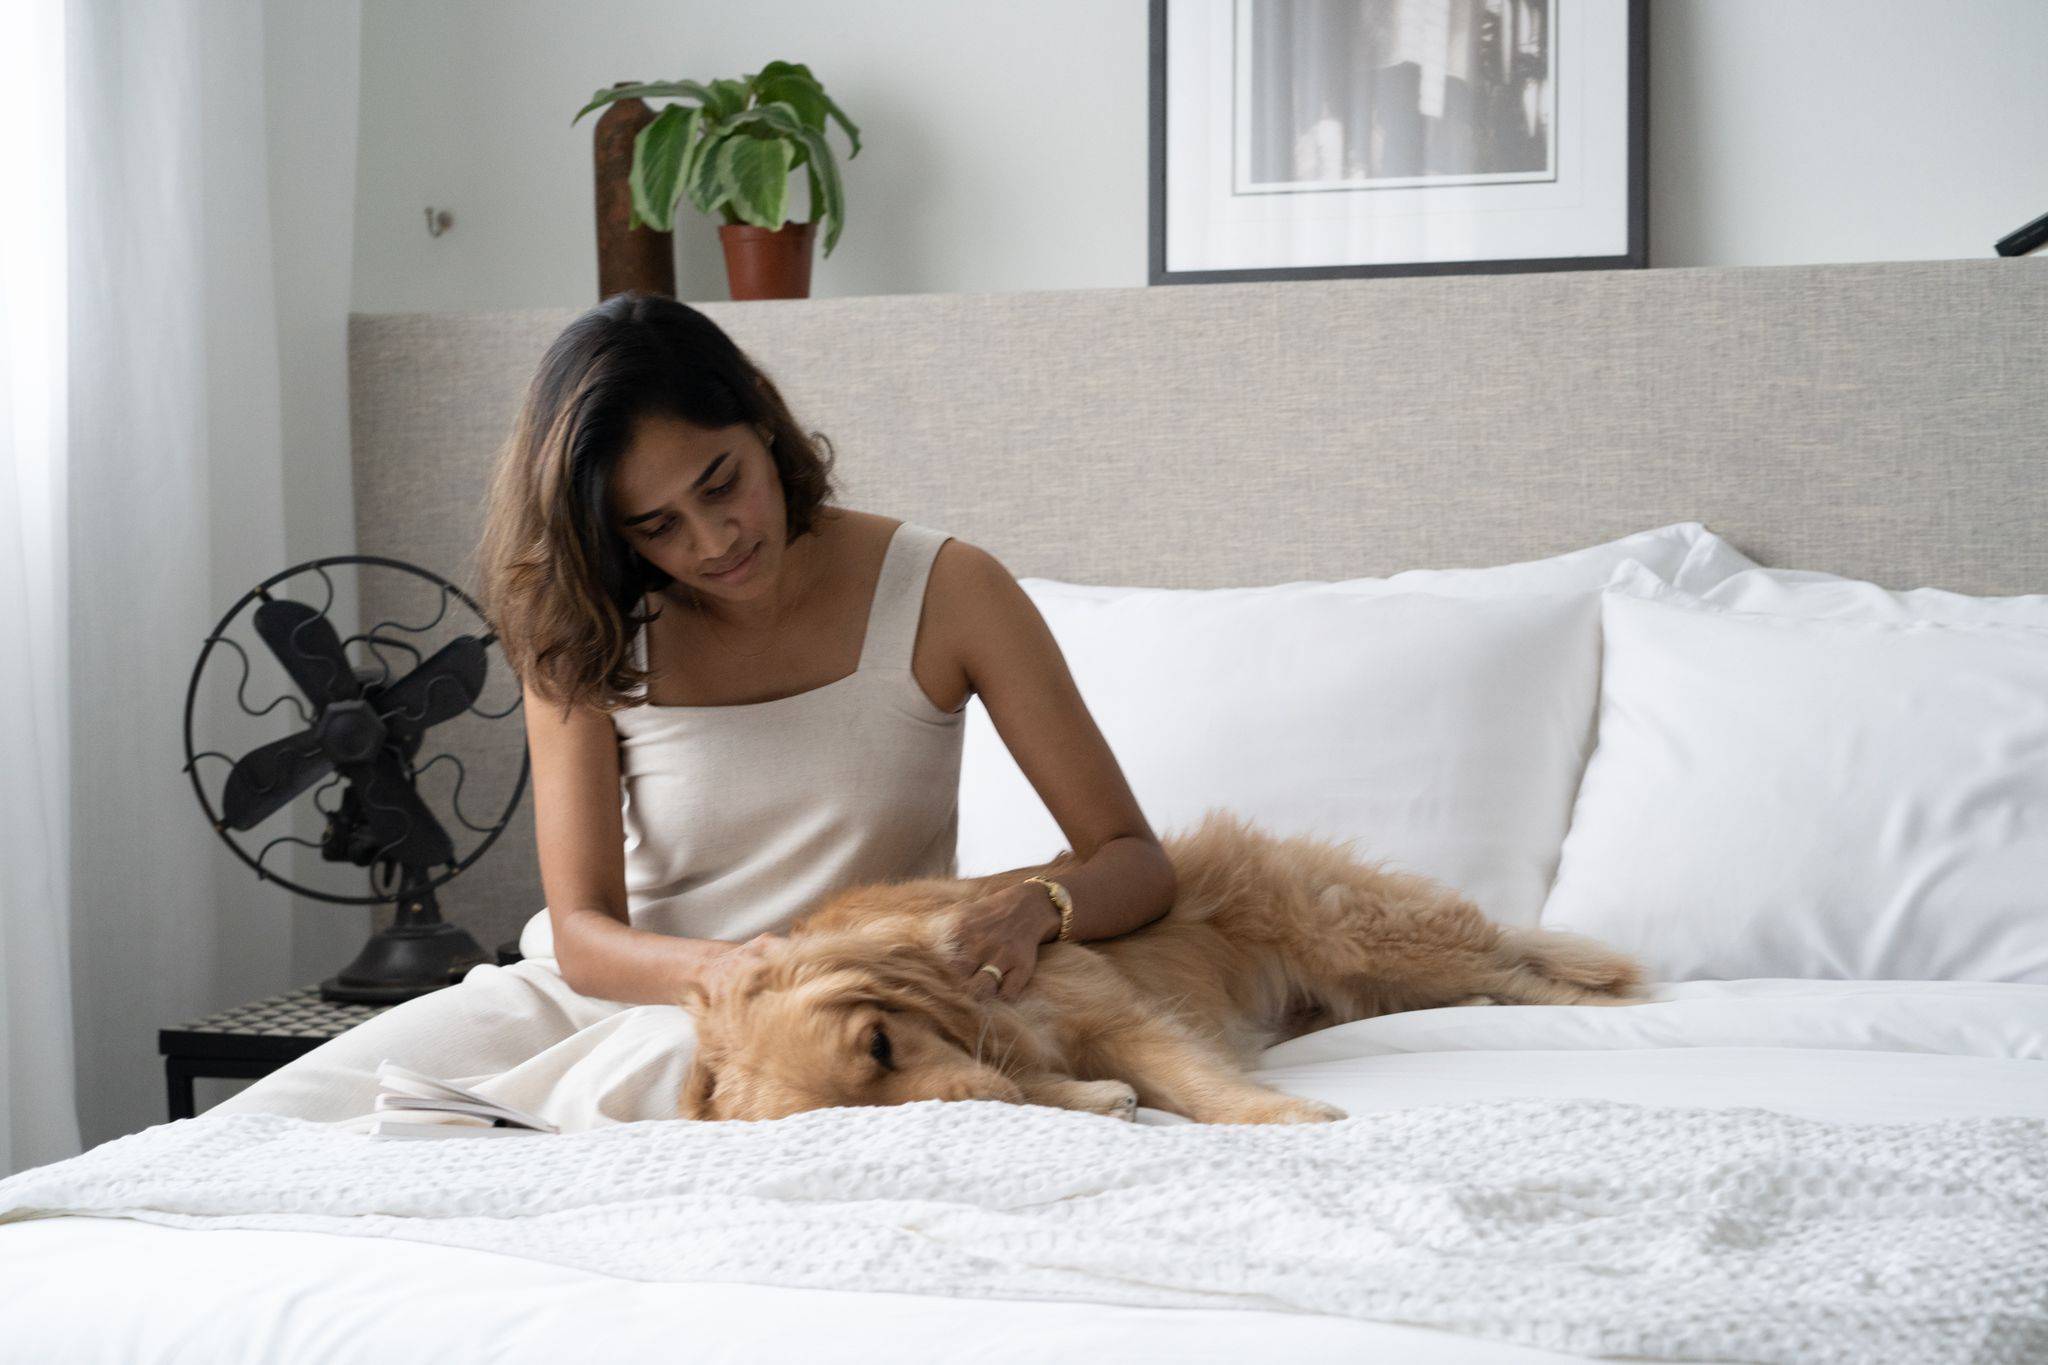 Woman petting her pet dog on the bed